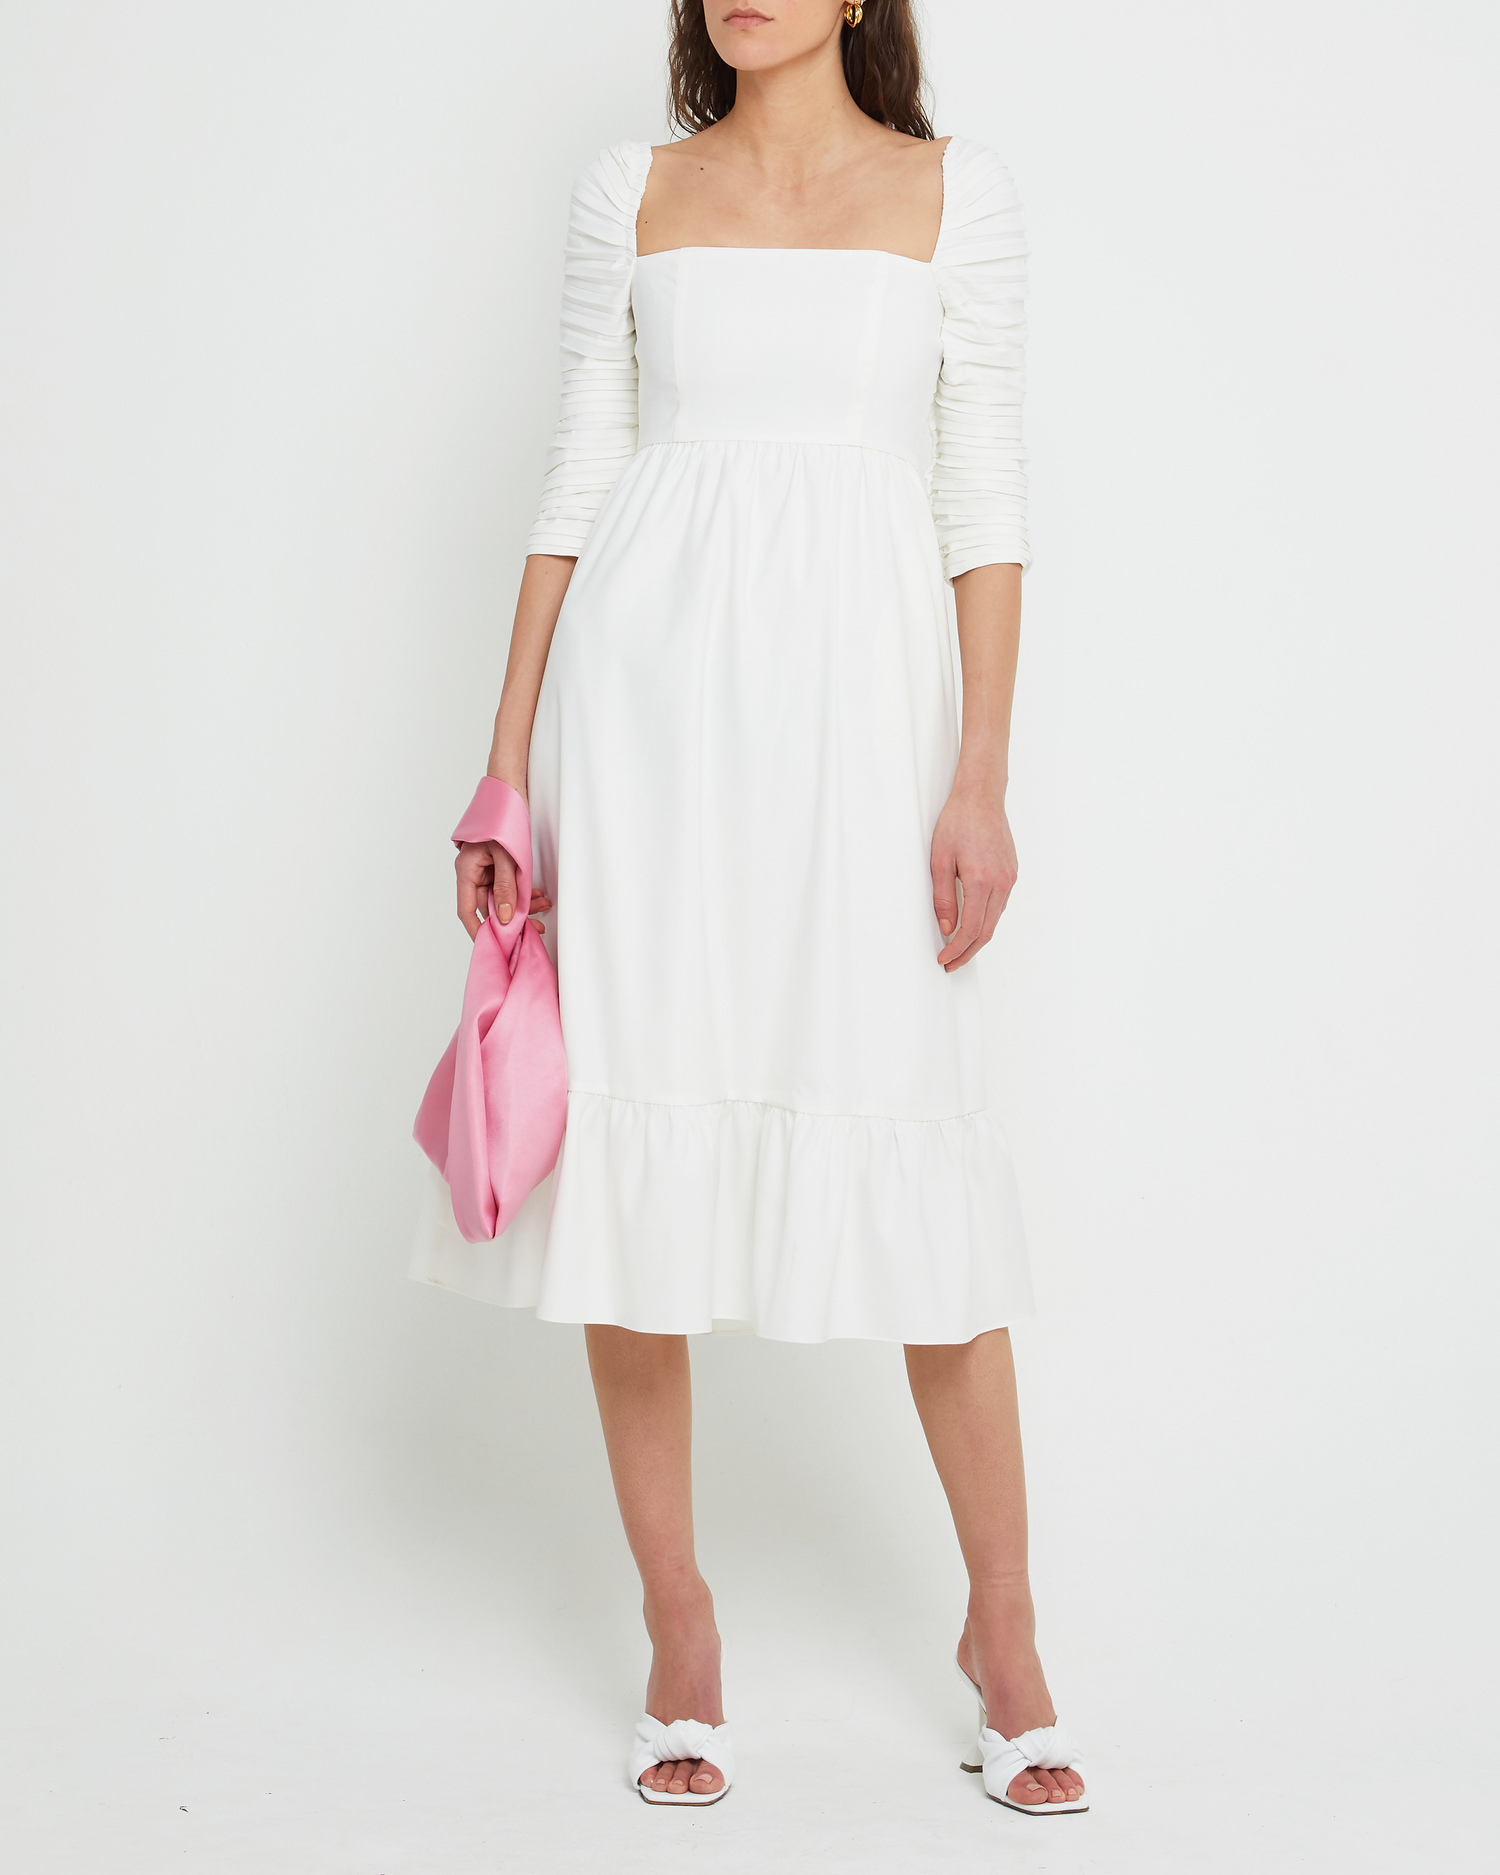 Fourth image of Bonnie Dress, a white midi dress, ruched bodice, mid sleeves, 3/4 sleeves, square neckline